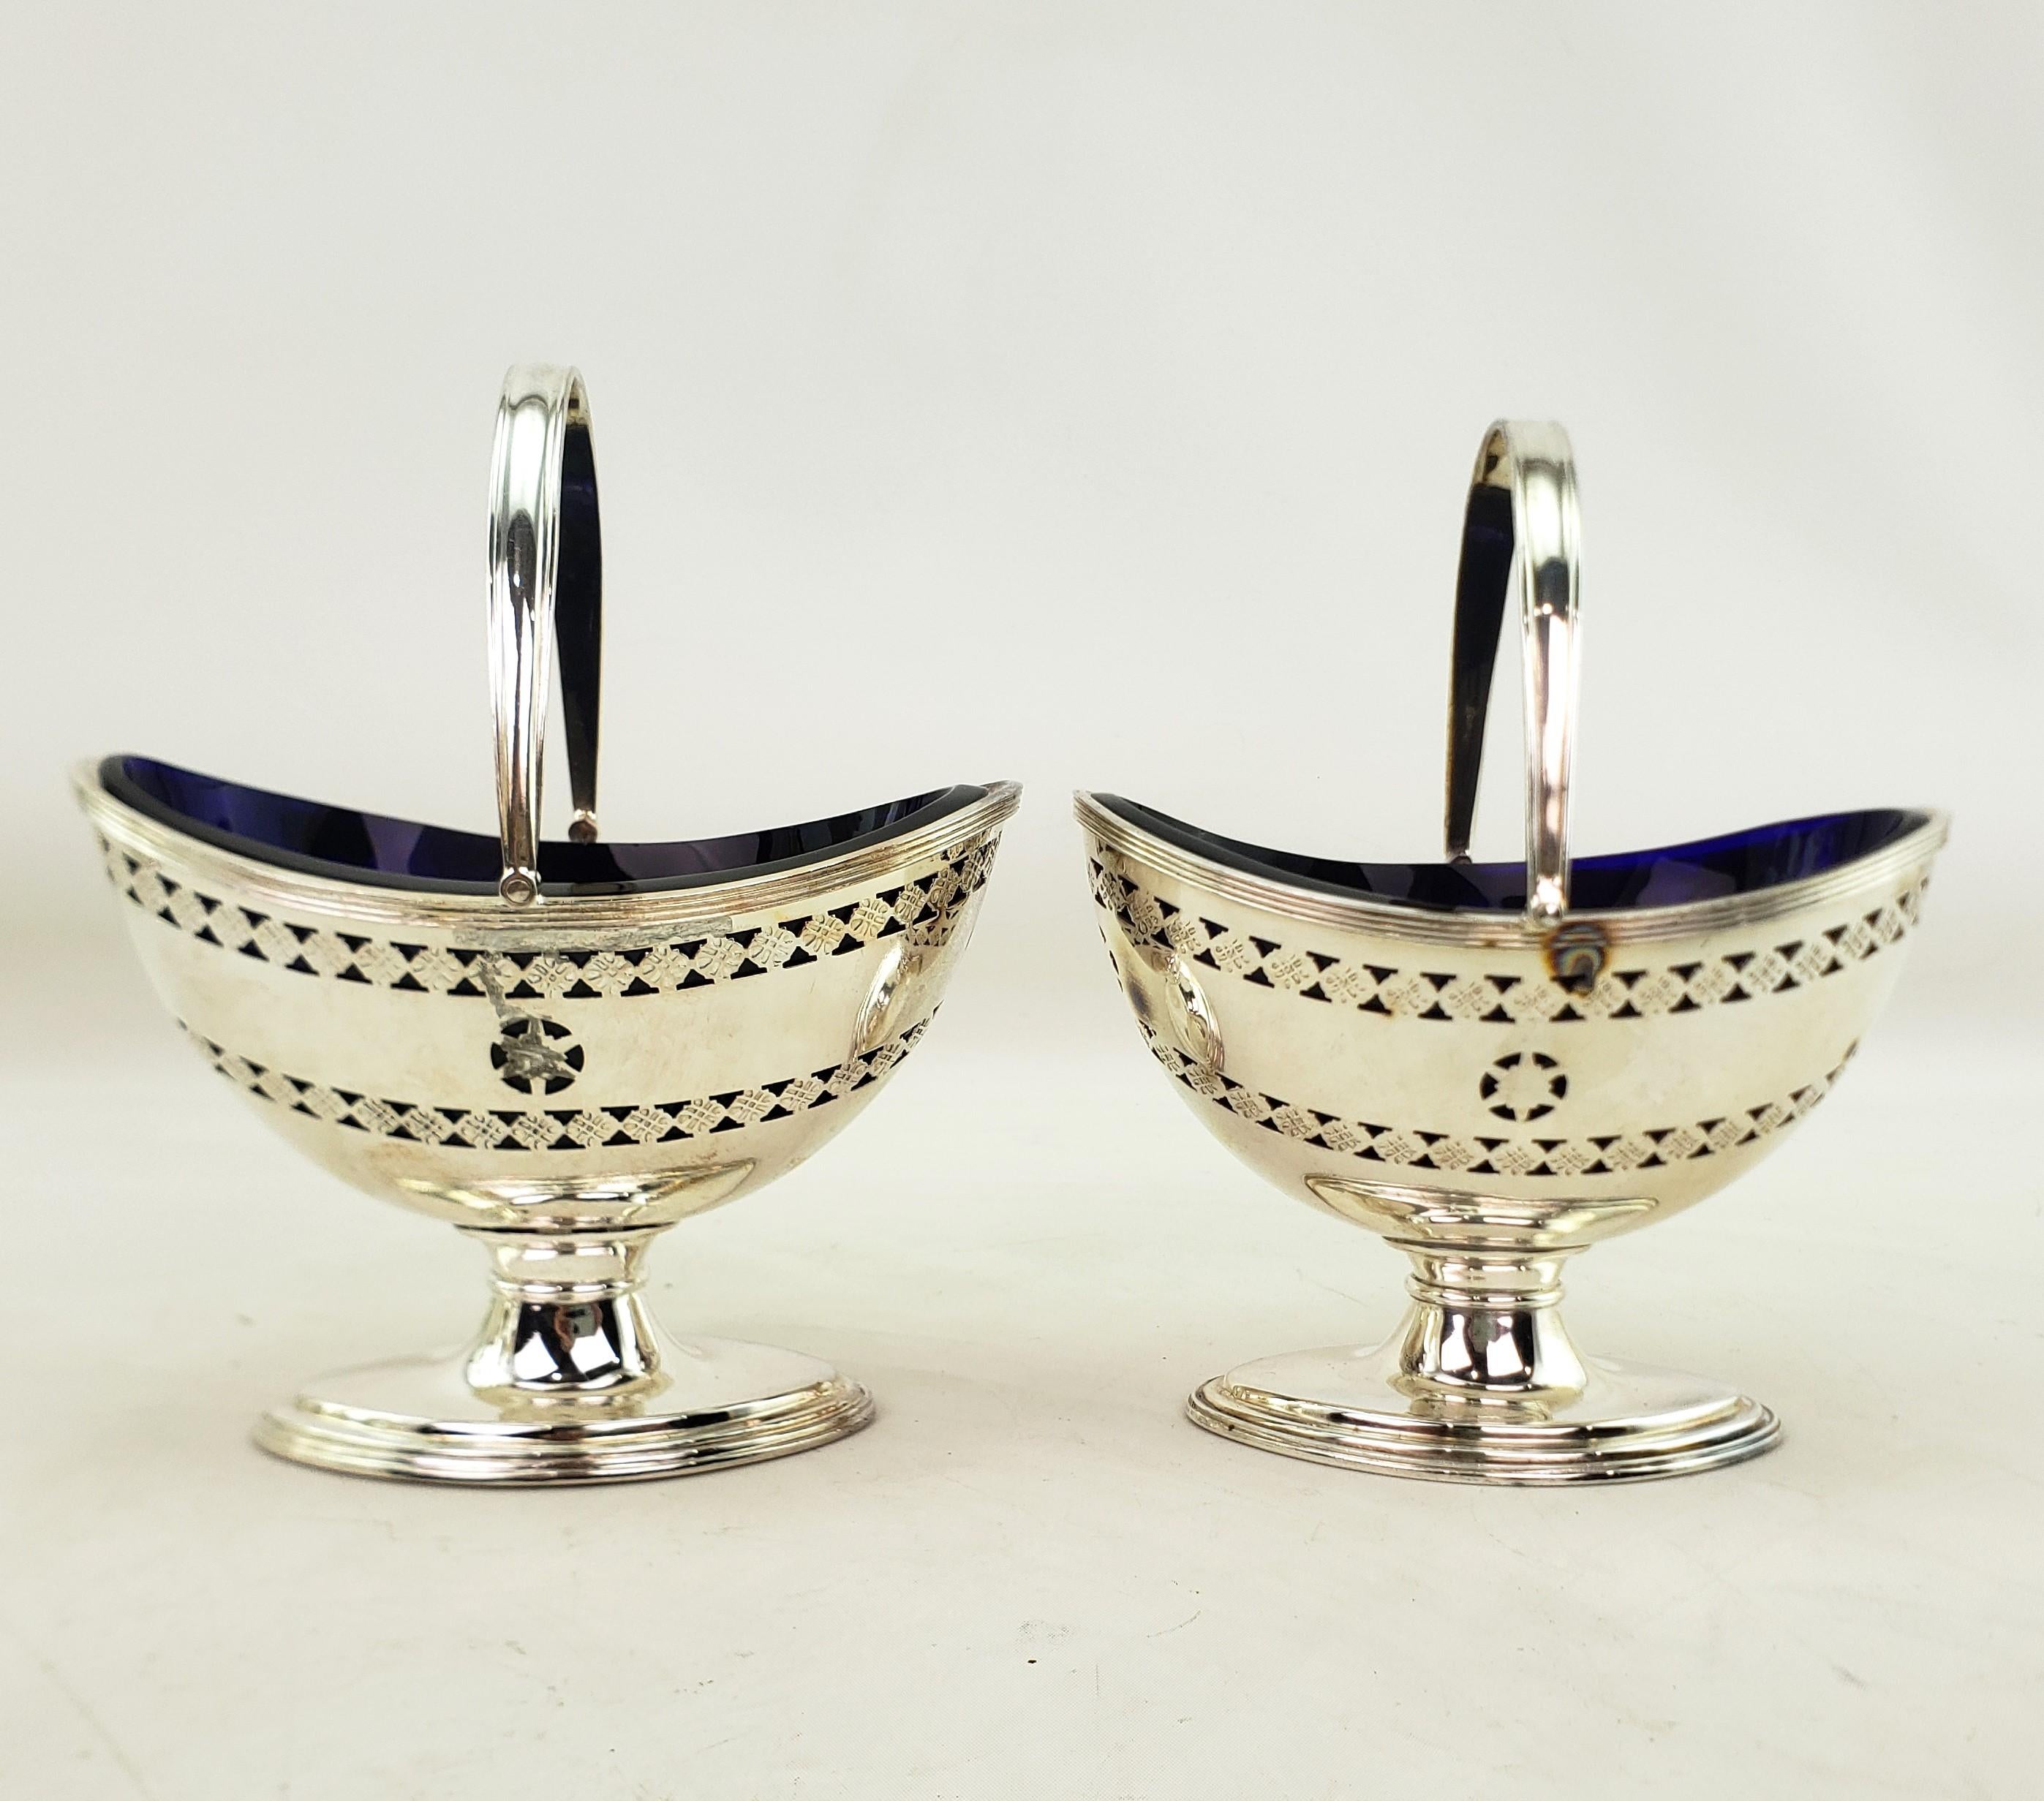 This pair of antique condiment servers were made by the well known Barker-Ellis Silver Company of England and date to approximately 1920 and done in a Victorian style. The servers are composed of silver plate and done in an oval basket form with